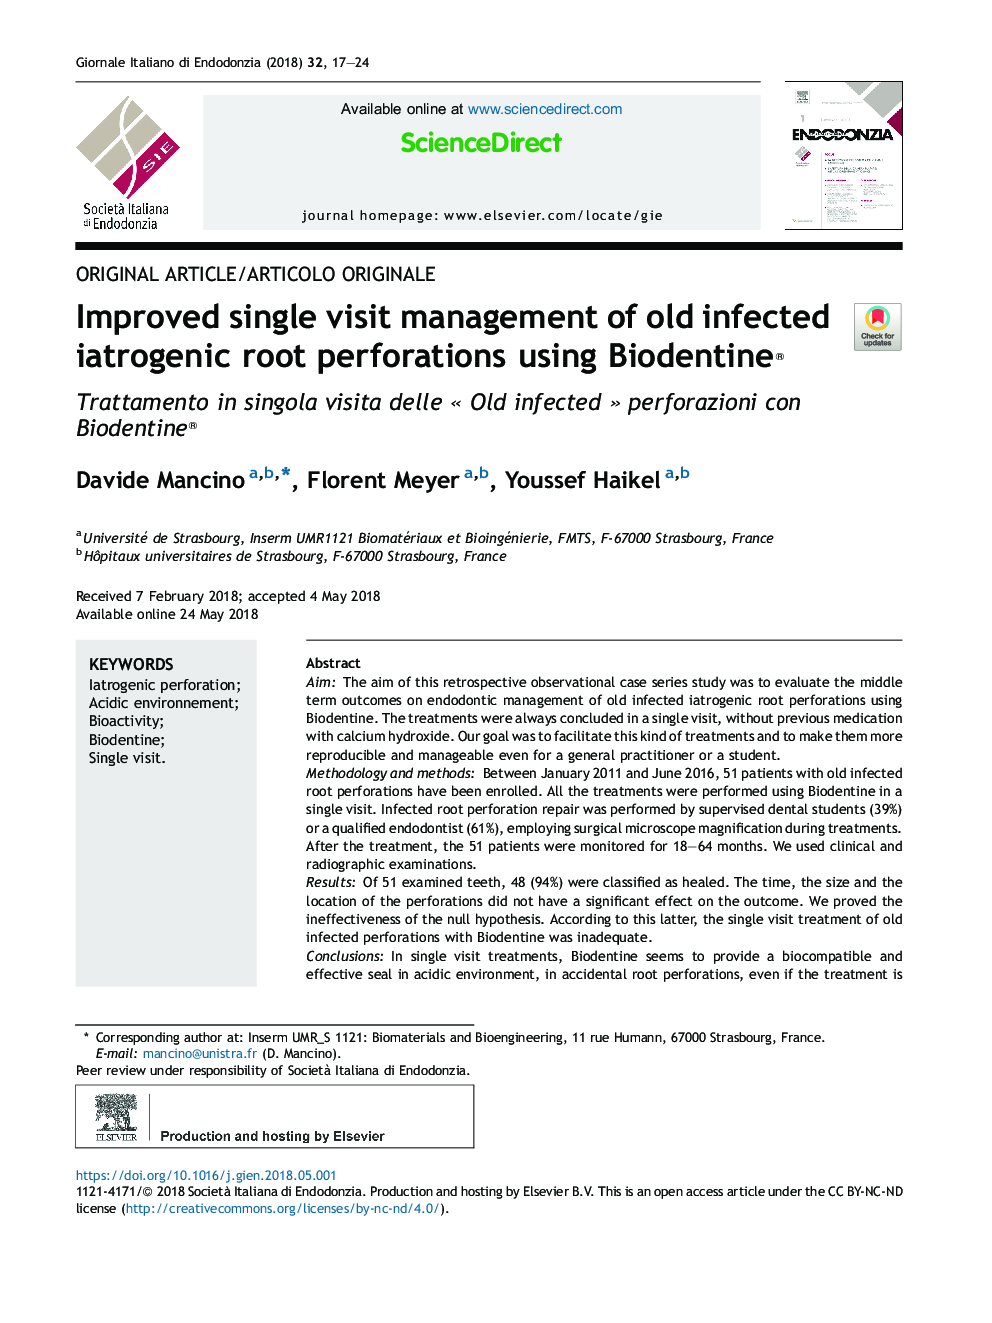 Improved single visit management of old infected iatrogenic root perforations using Biodentine®